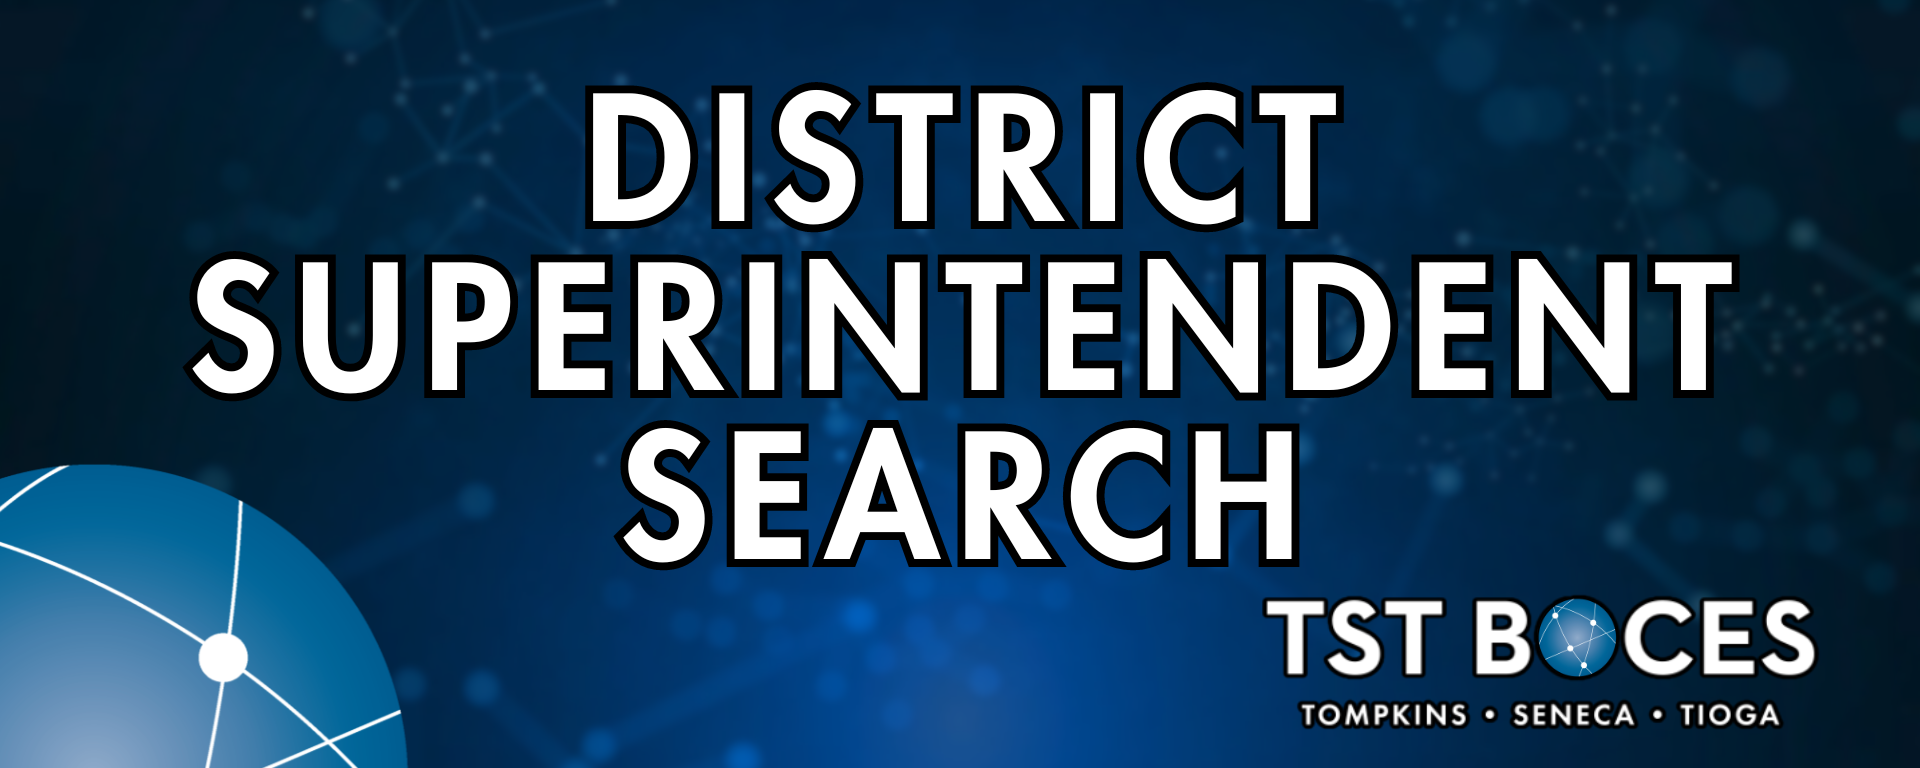 district superintendent search